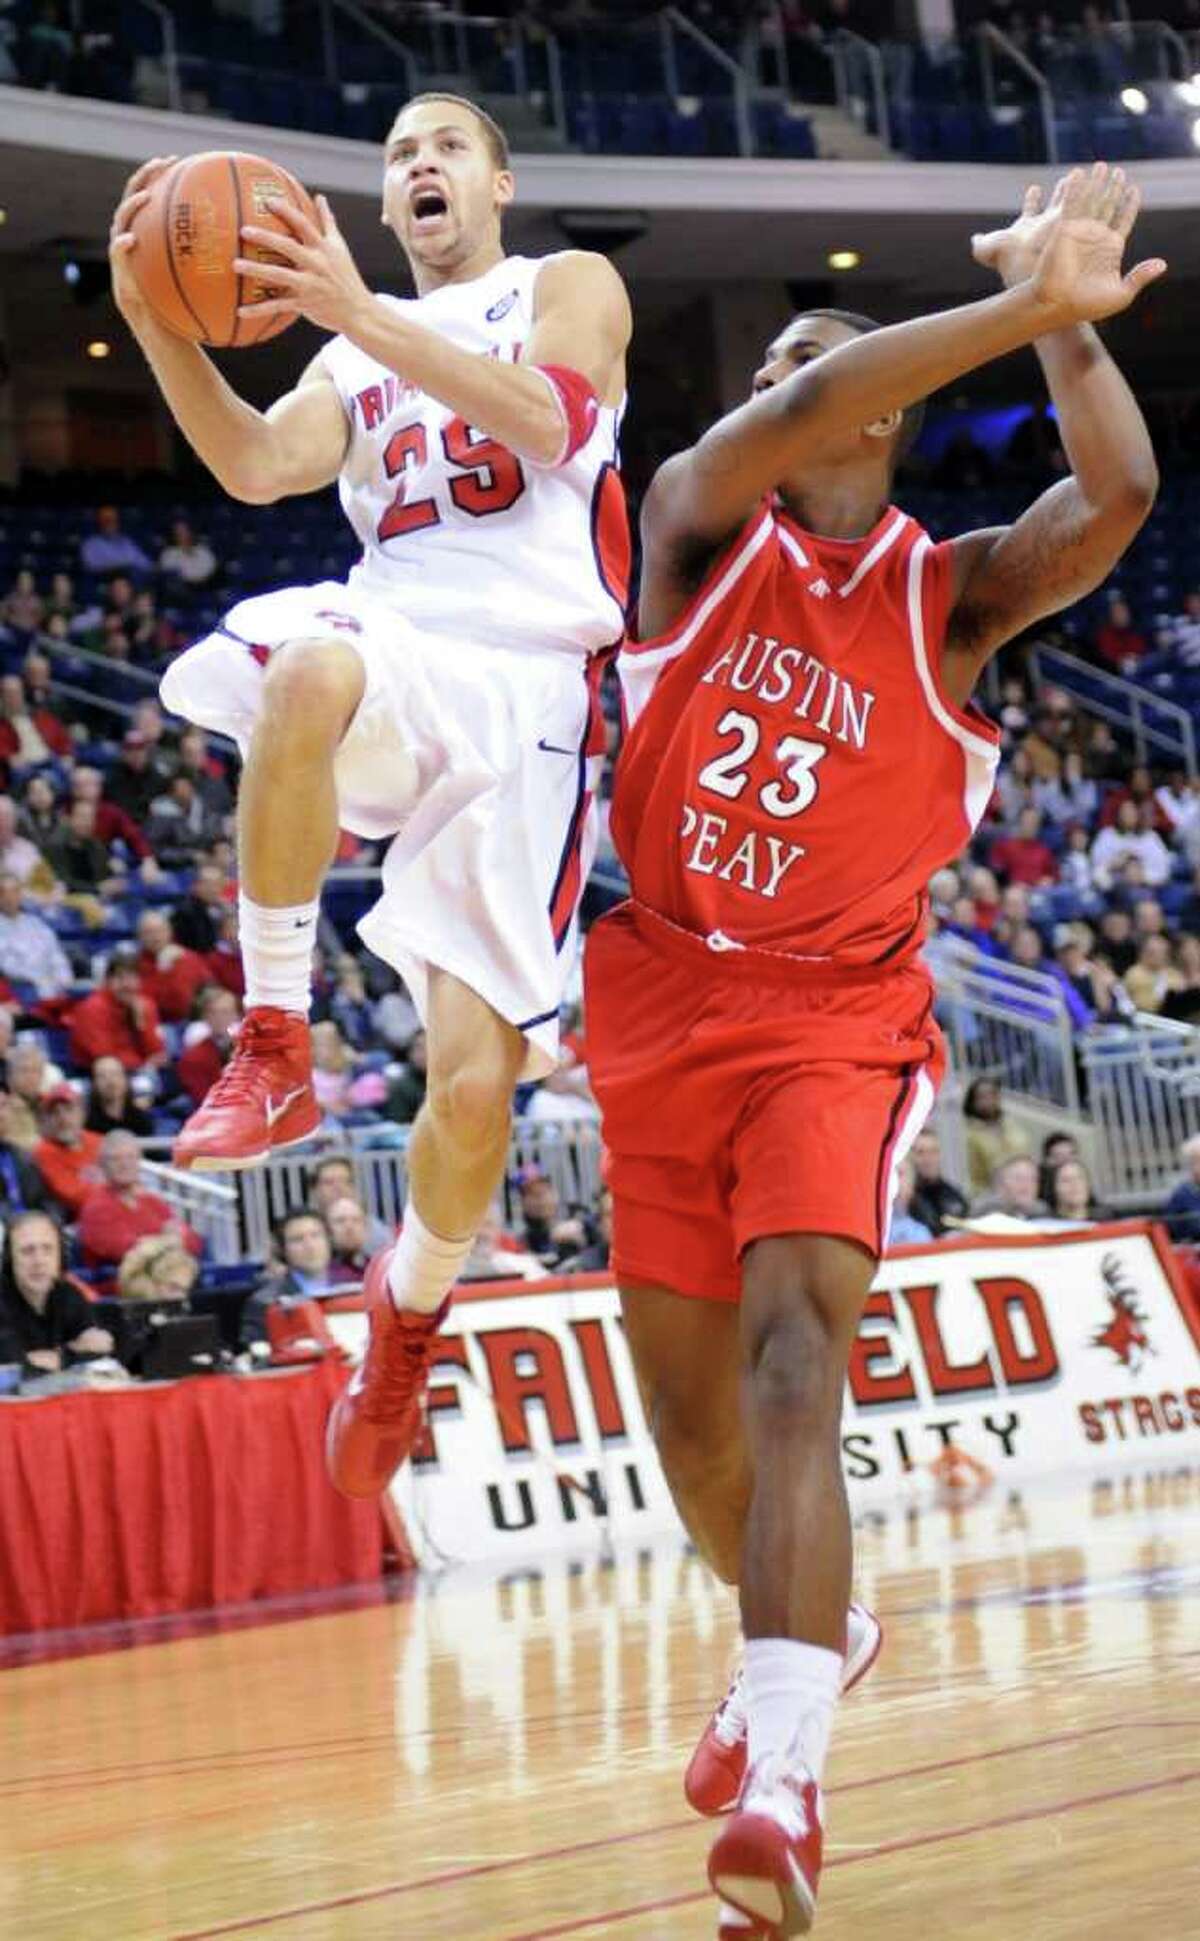 Fairfield's Colin Nickerson is fouled by Austin Peay's Josh Terry during their game at the Webster Bank Arena at Harbor Yard in Bridgeport, Conn. Saturday, Feb. 19, 2011.